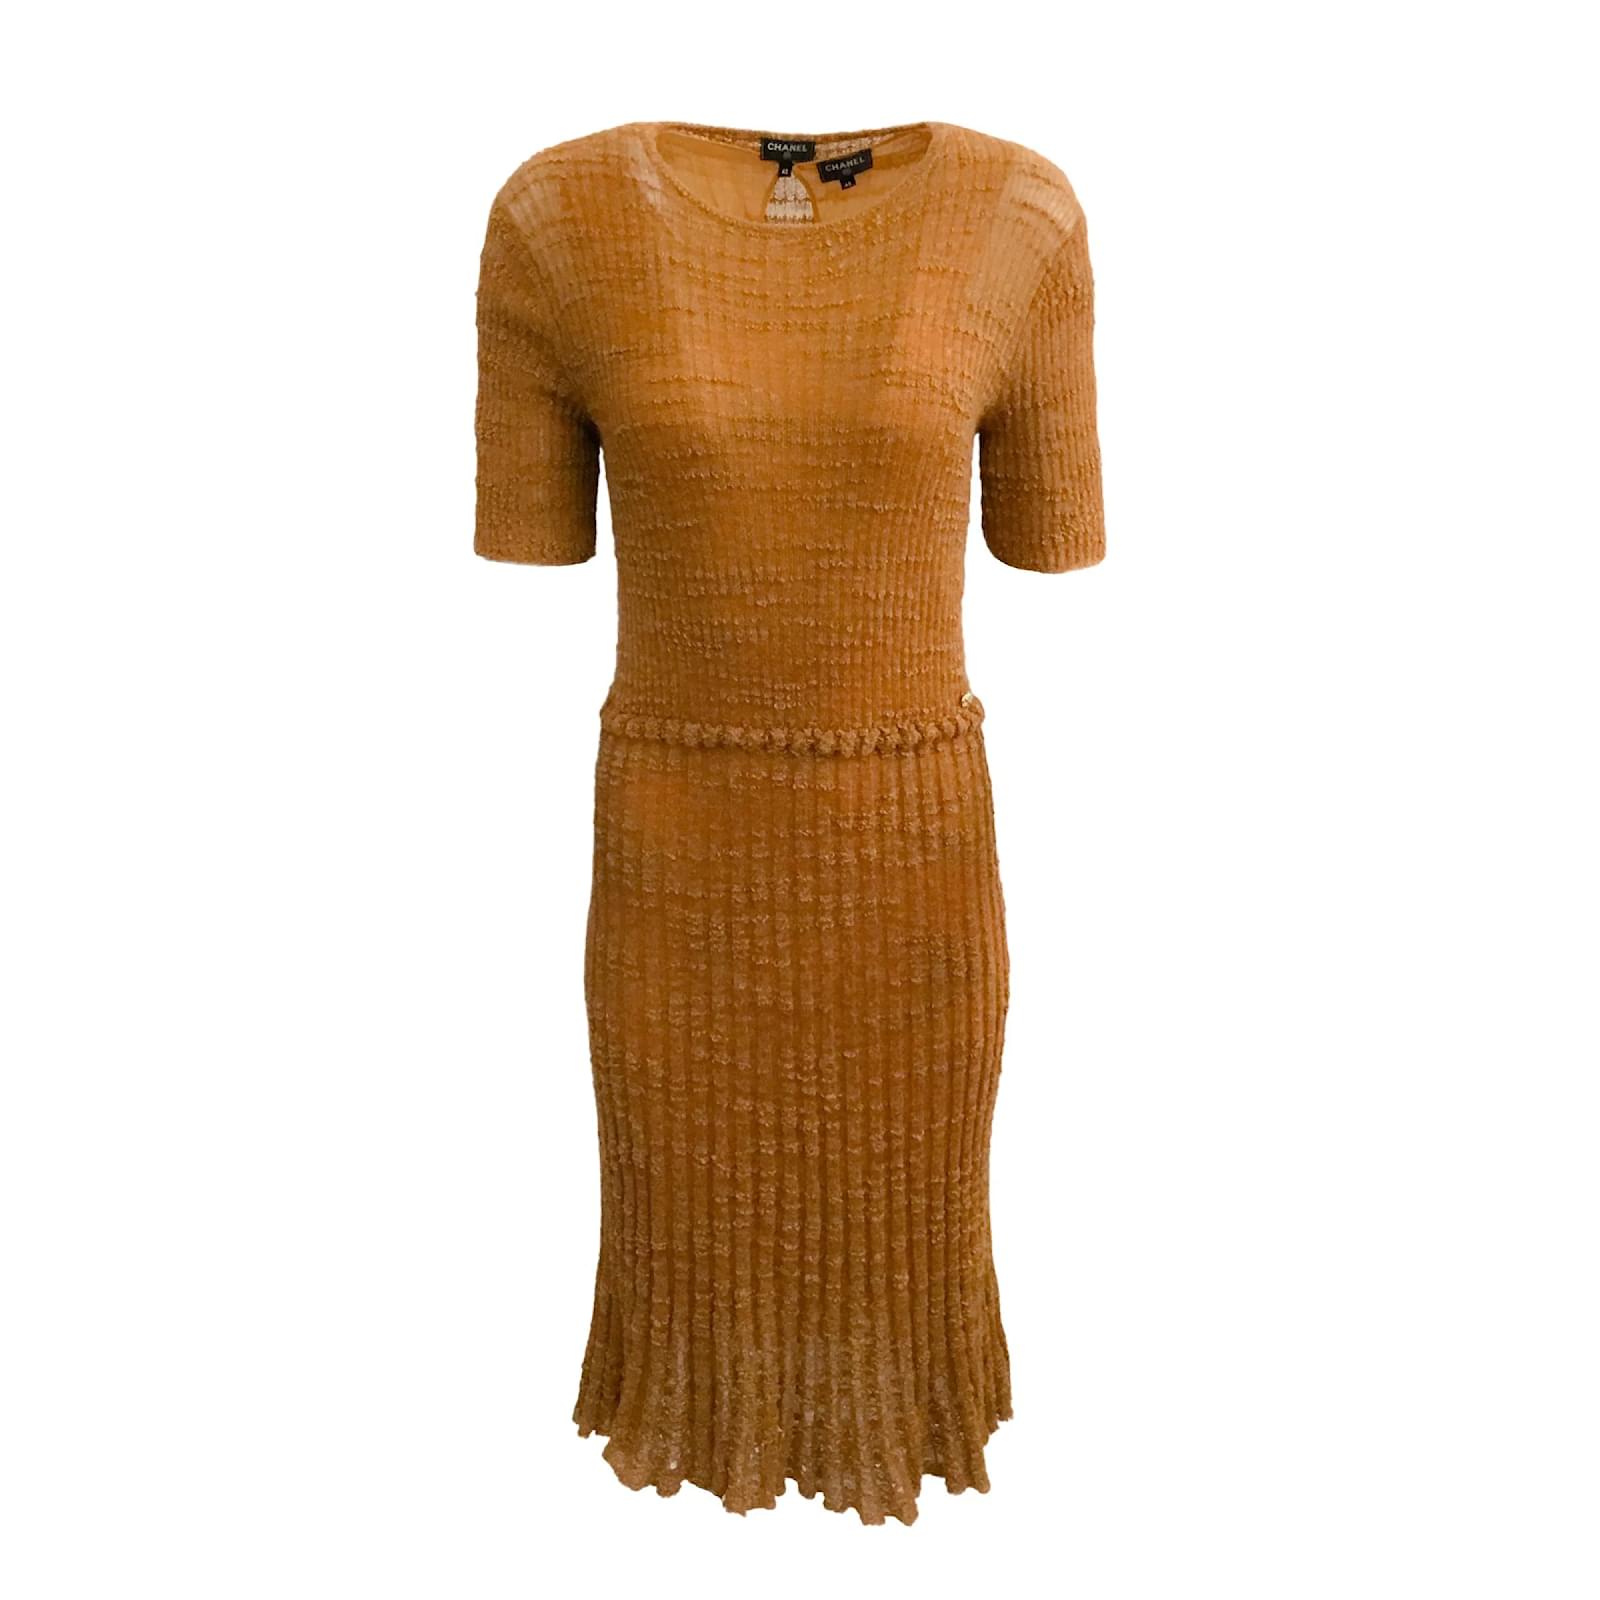 Dresses Chanel Chanel Marigold Ribbed Knit with Slip Work/Office Dress